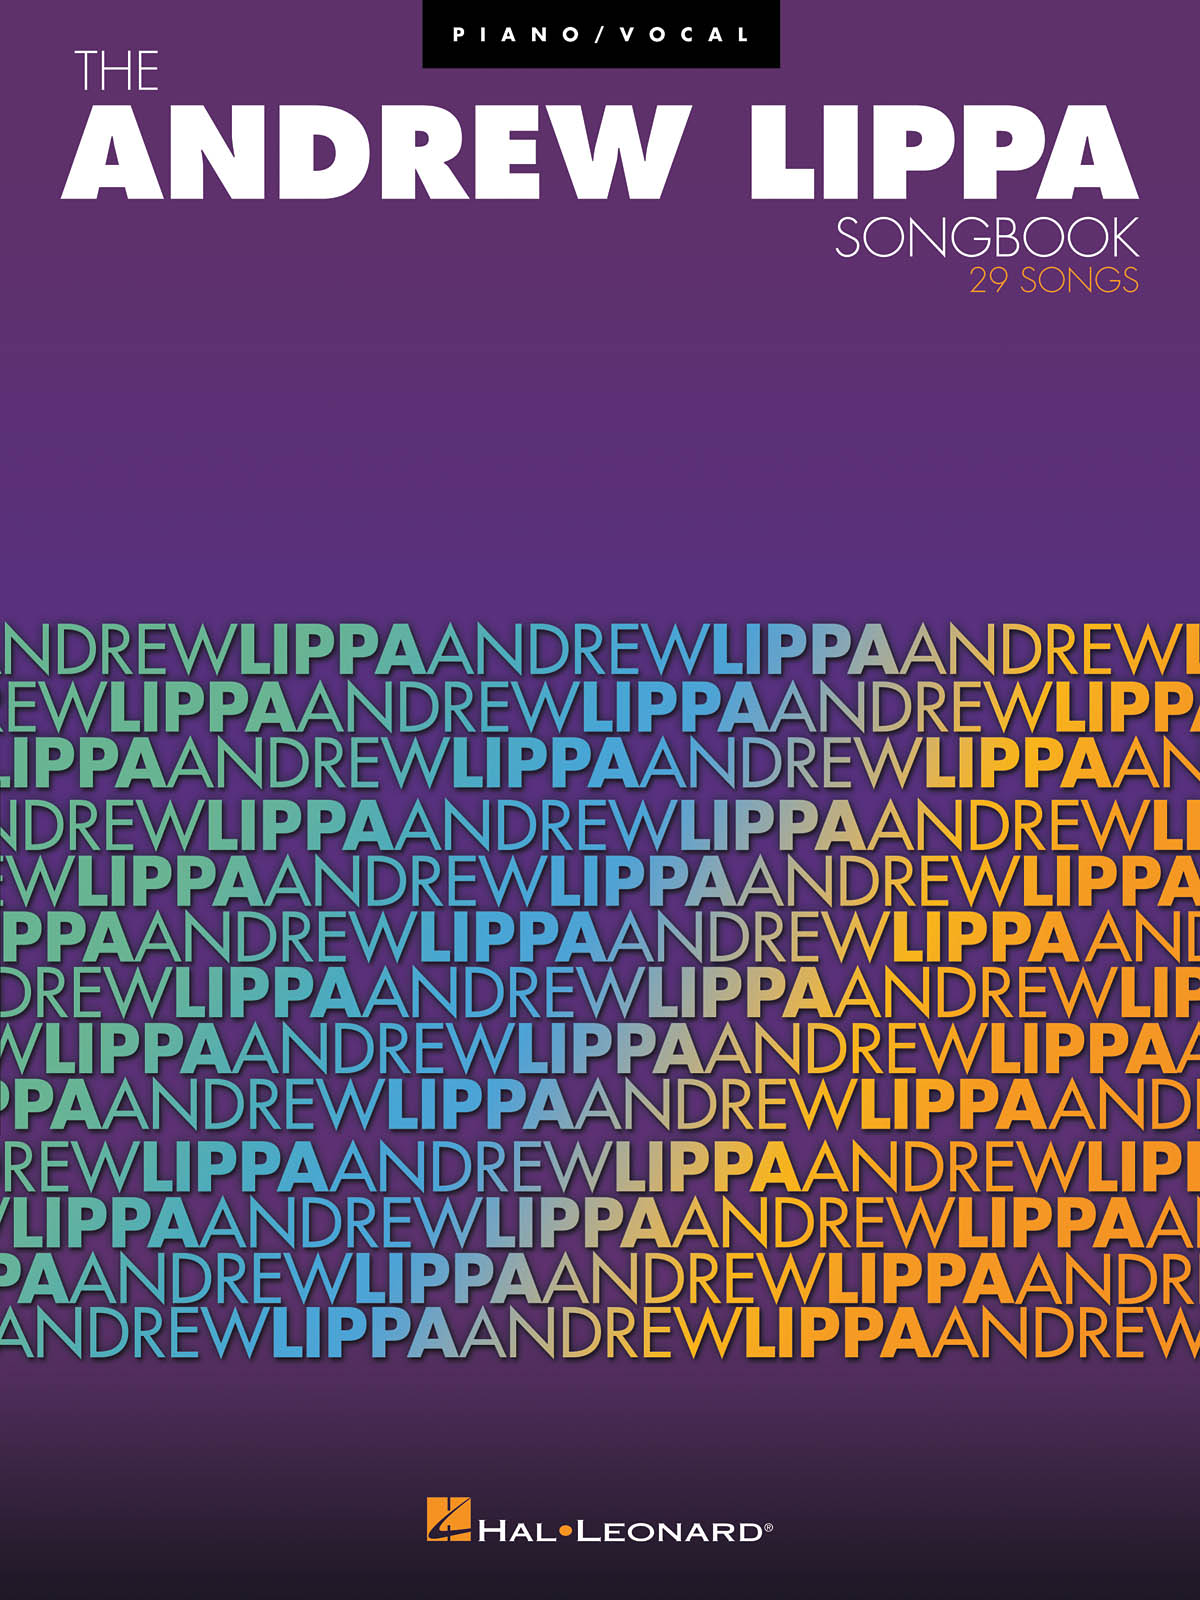 The Andrew Lippa Songbook(29 Songs)